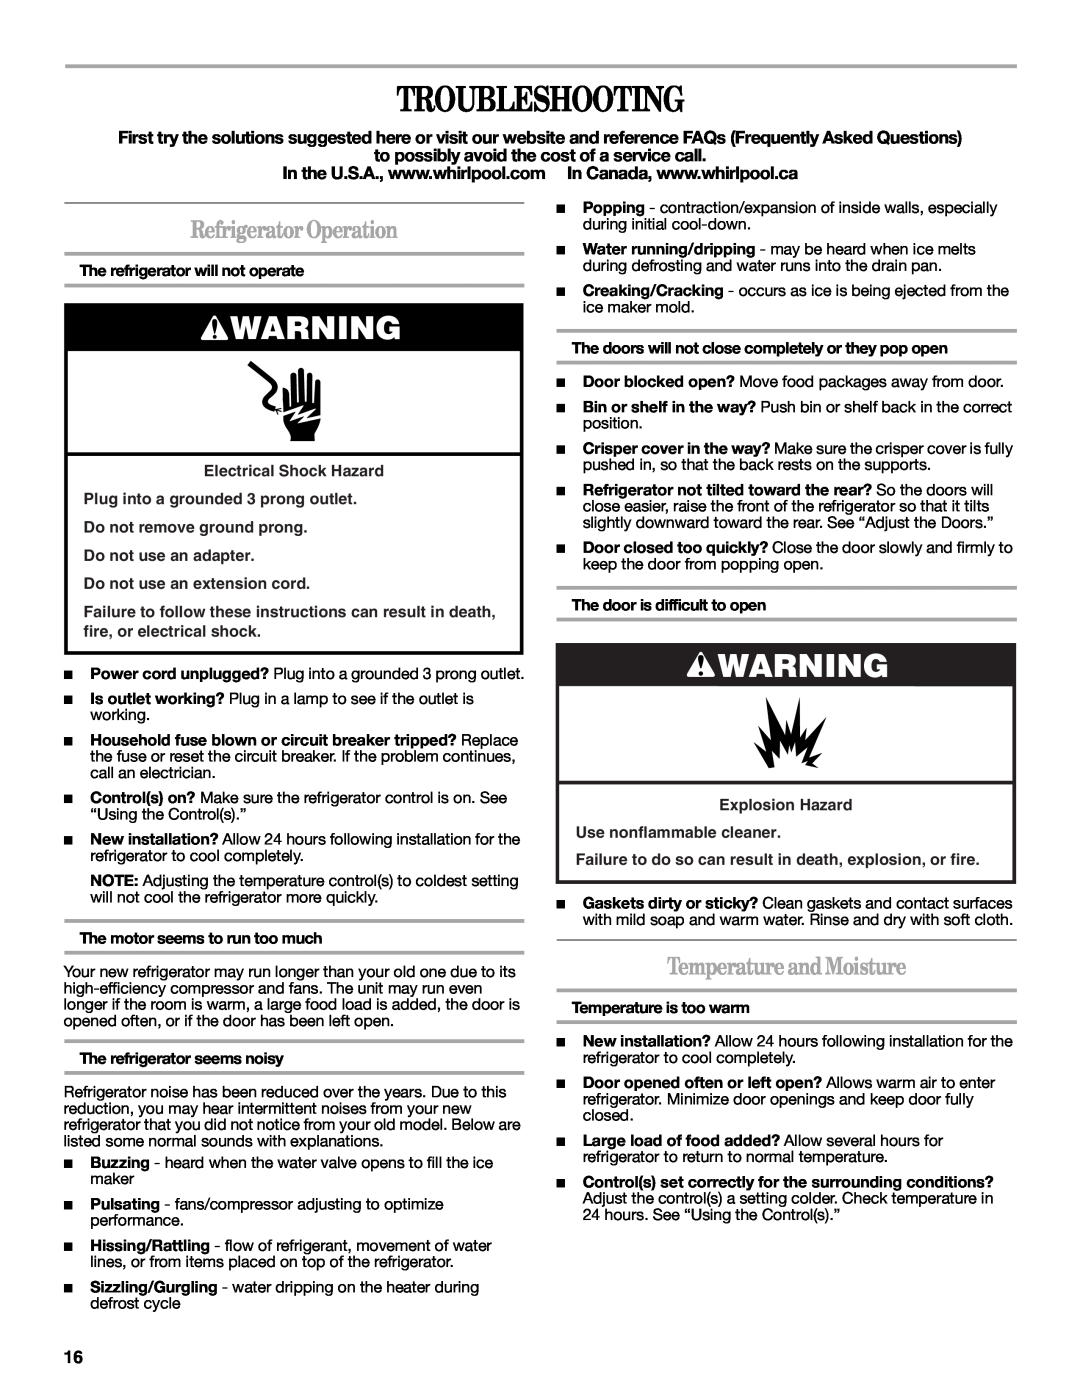 Whirlpool W10343810A installation instructions Troubleshooting, Refrigerator Operation, Temperature and Moisture 